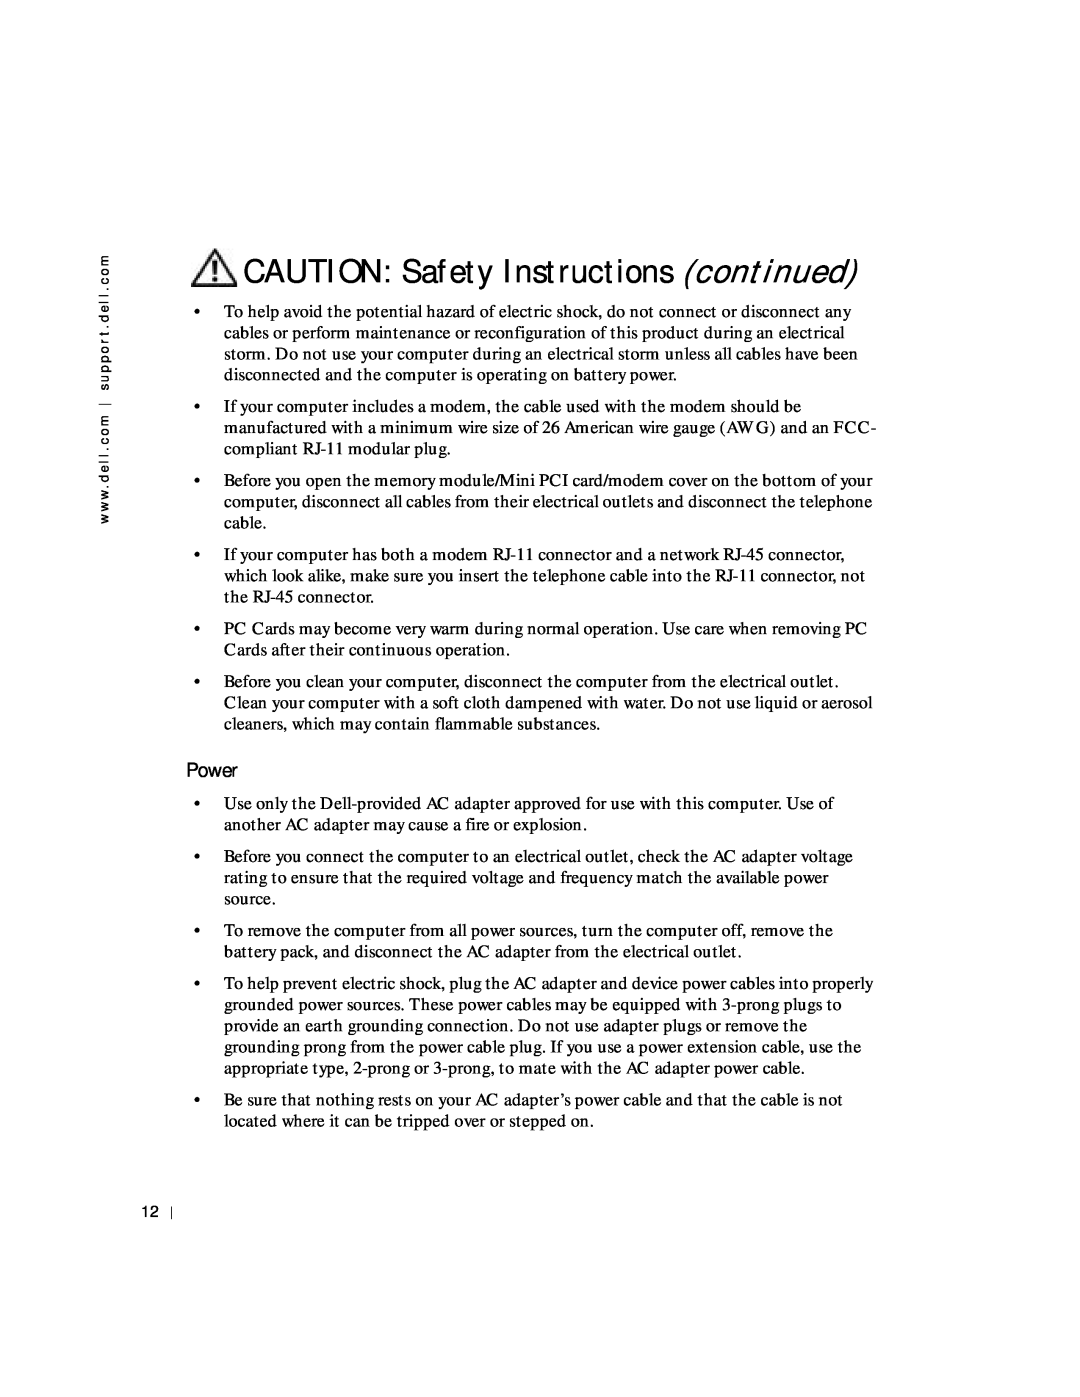 Dell 8600 manual CAUTION Safety Instructions continued, Power 